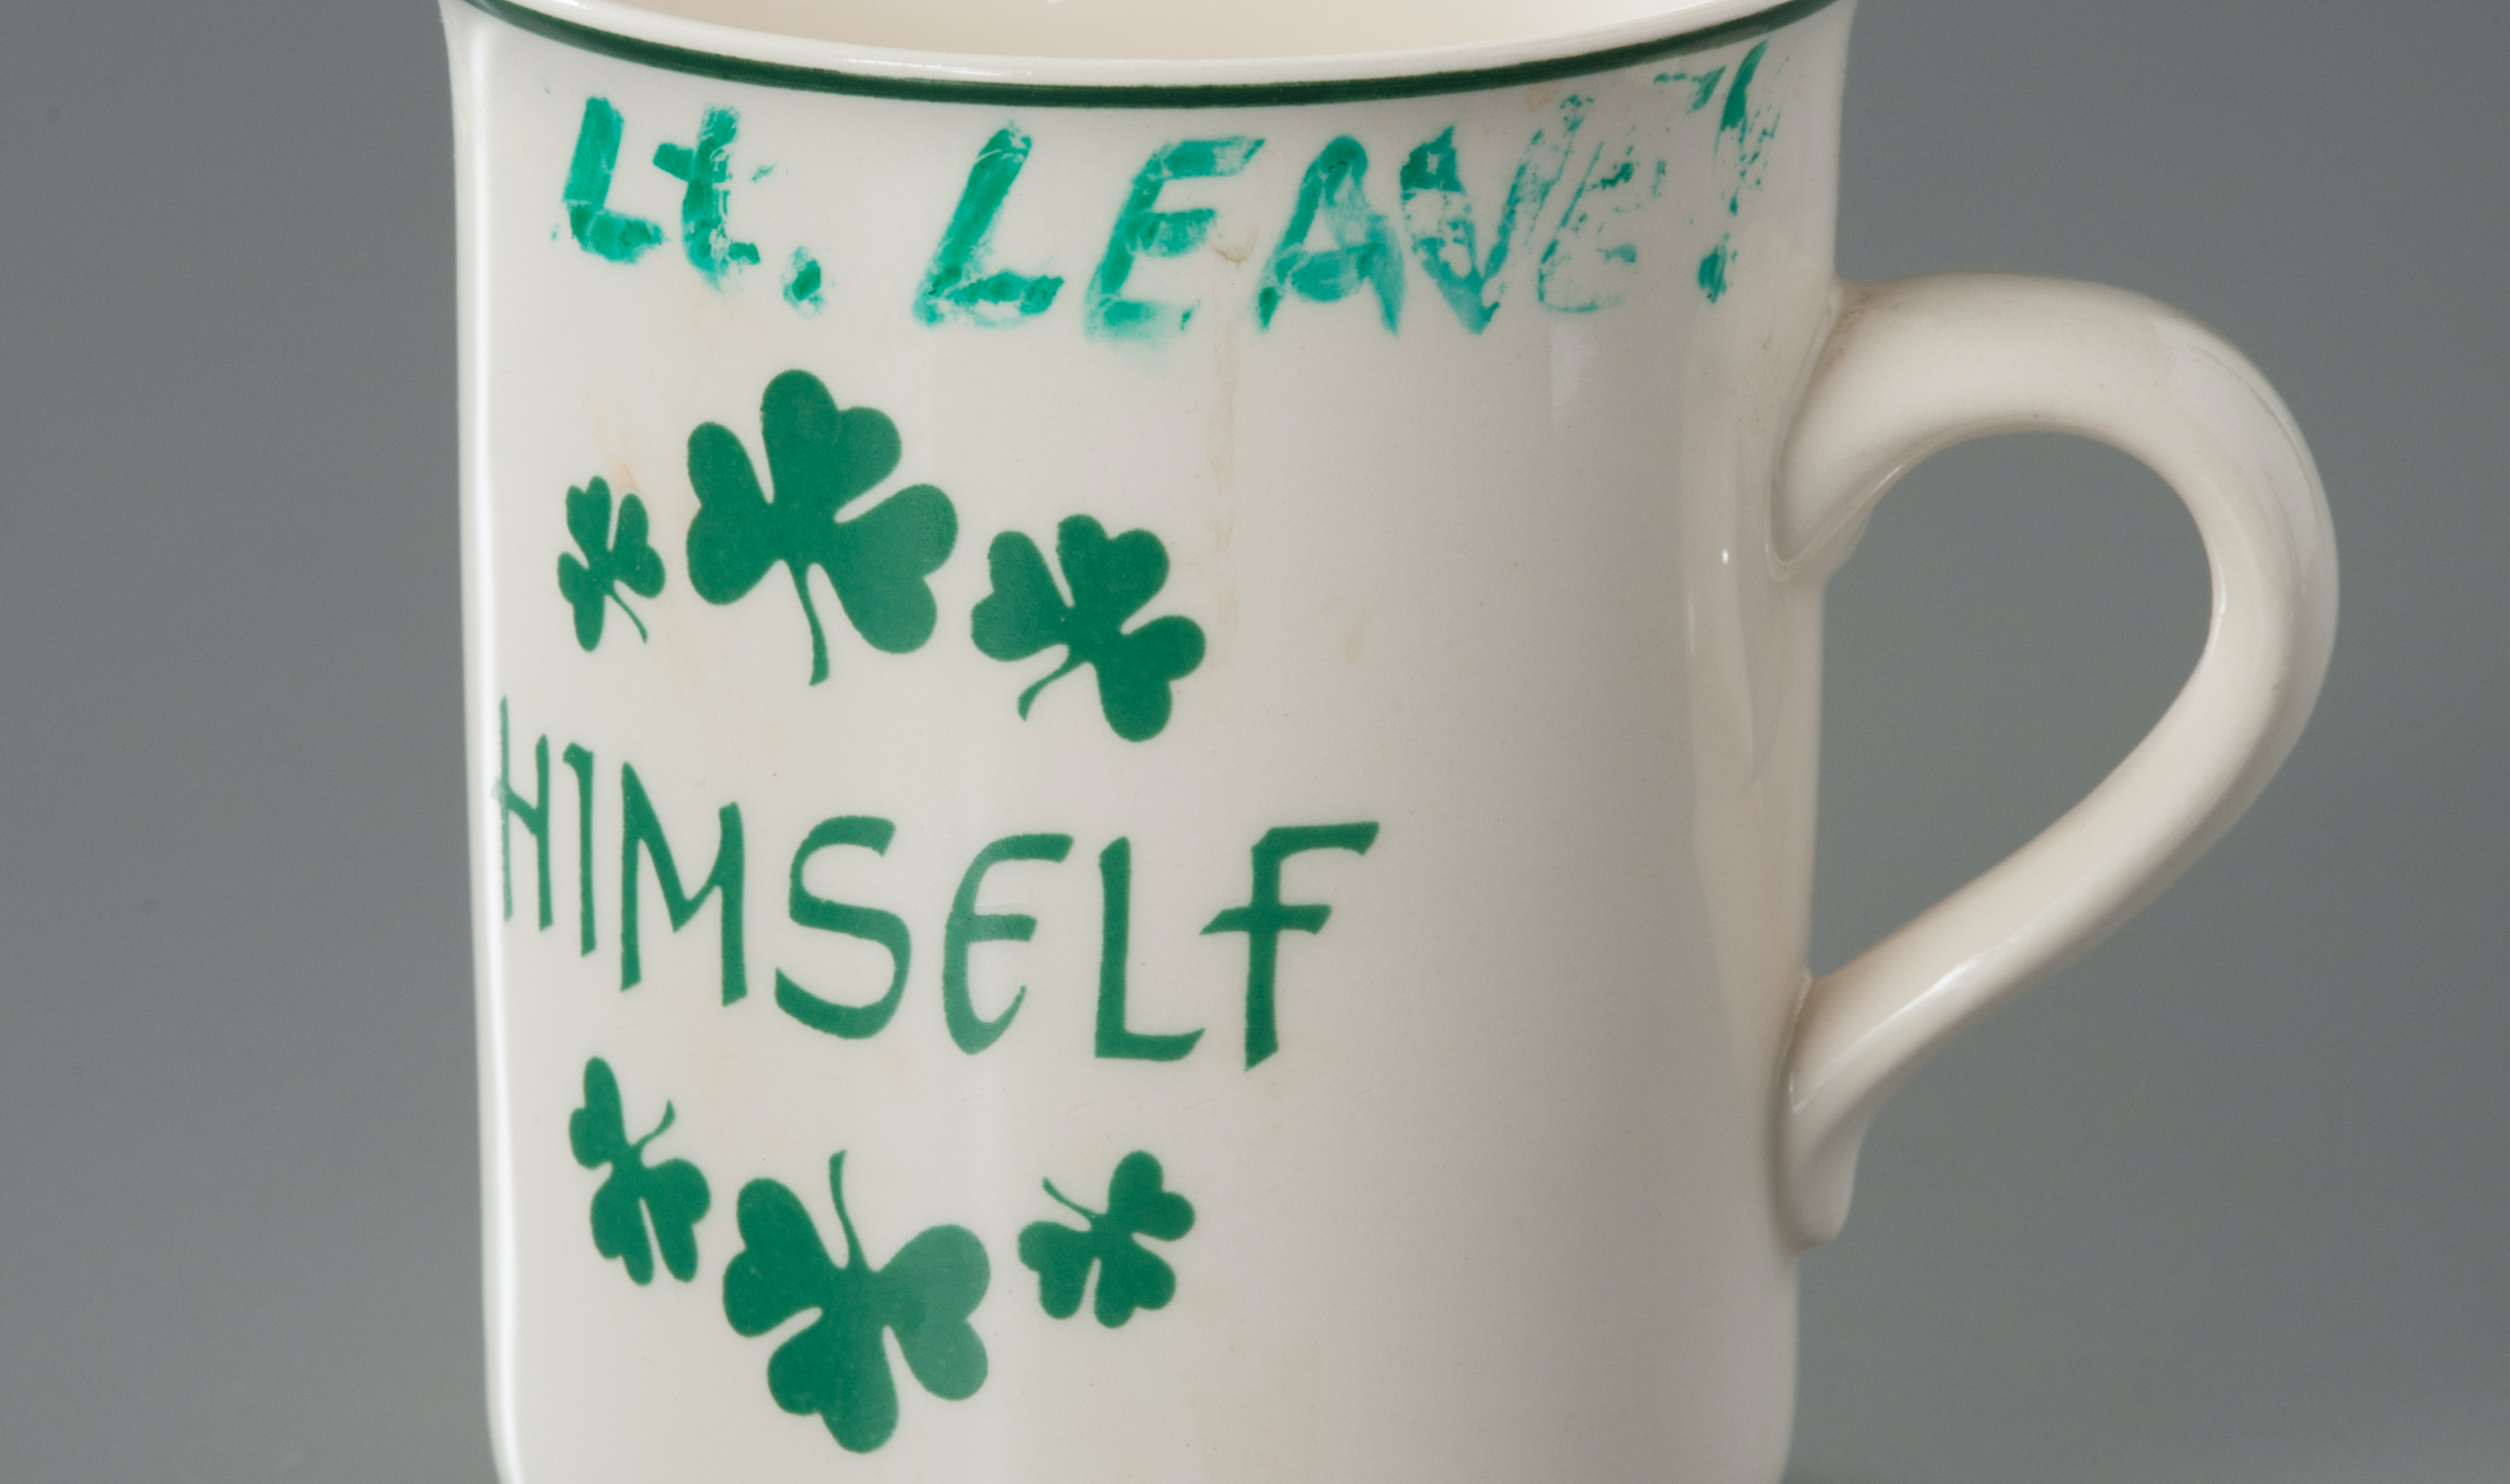 A mug belonging to FDNY Lieutenant Joseph Leavey is displayed on a gray surface at the museum. The white mug is adorned with green shamrocks. The word "himself" is printed in green on the mug. Leavey's name has been written in green marker on the lip of the cup.